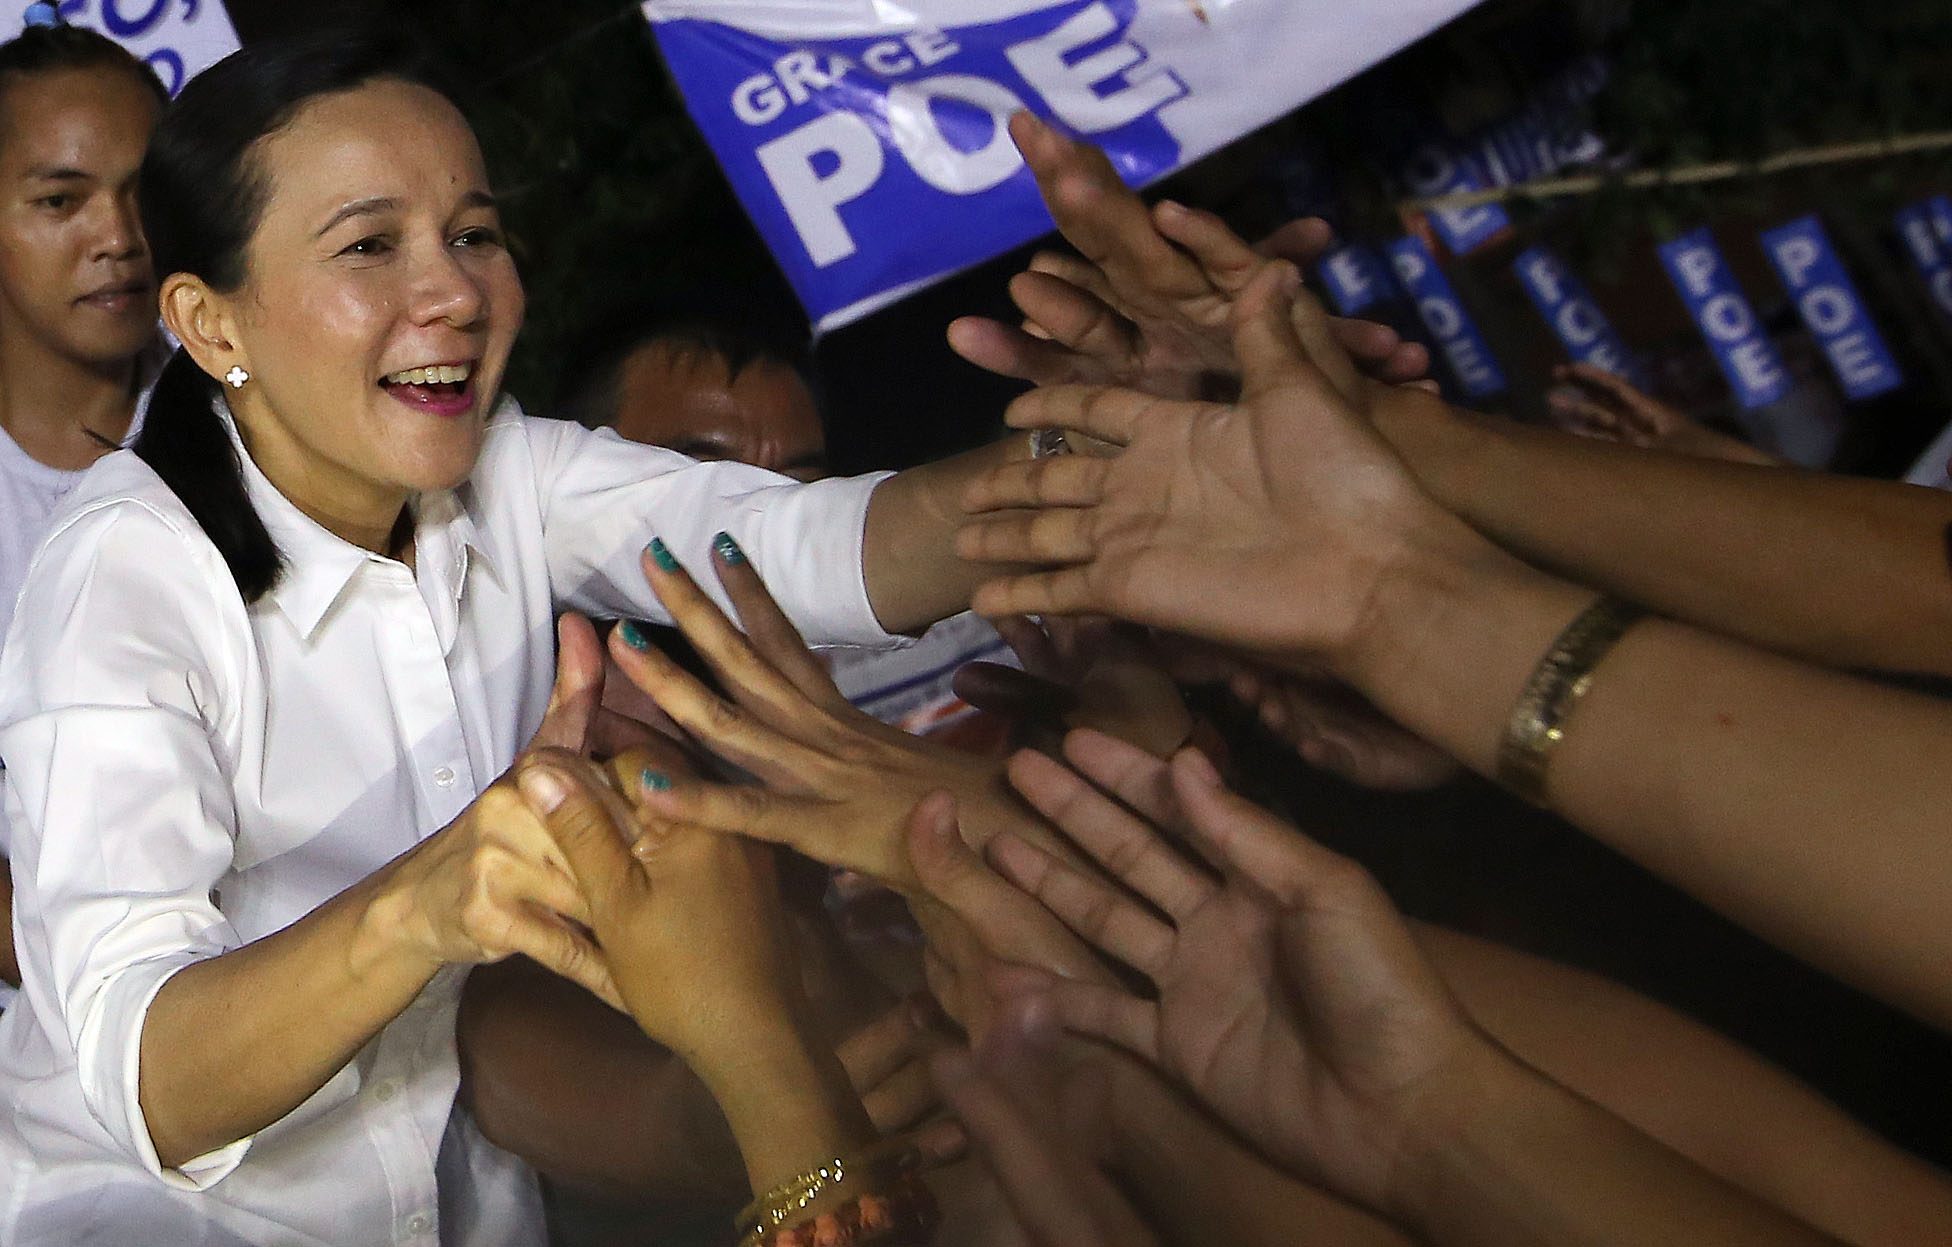 Poe seeks St Jude of the ‘impossible’ as poll nears